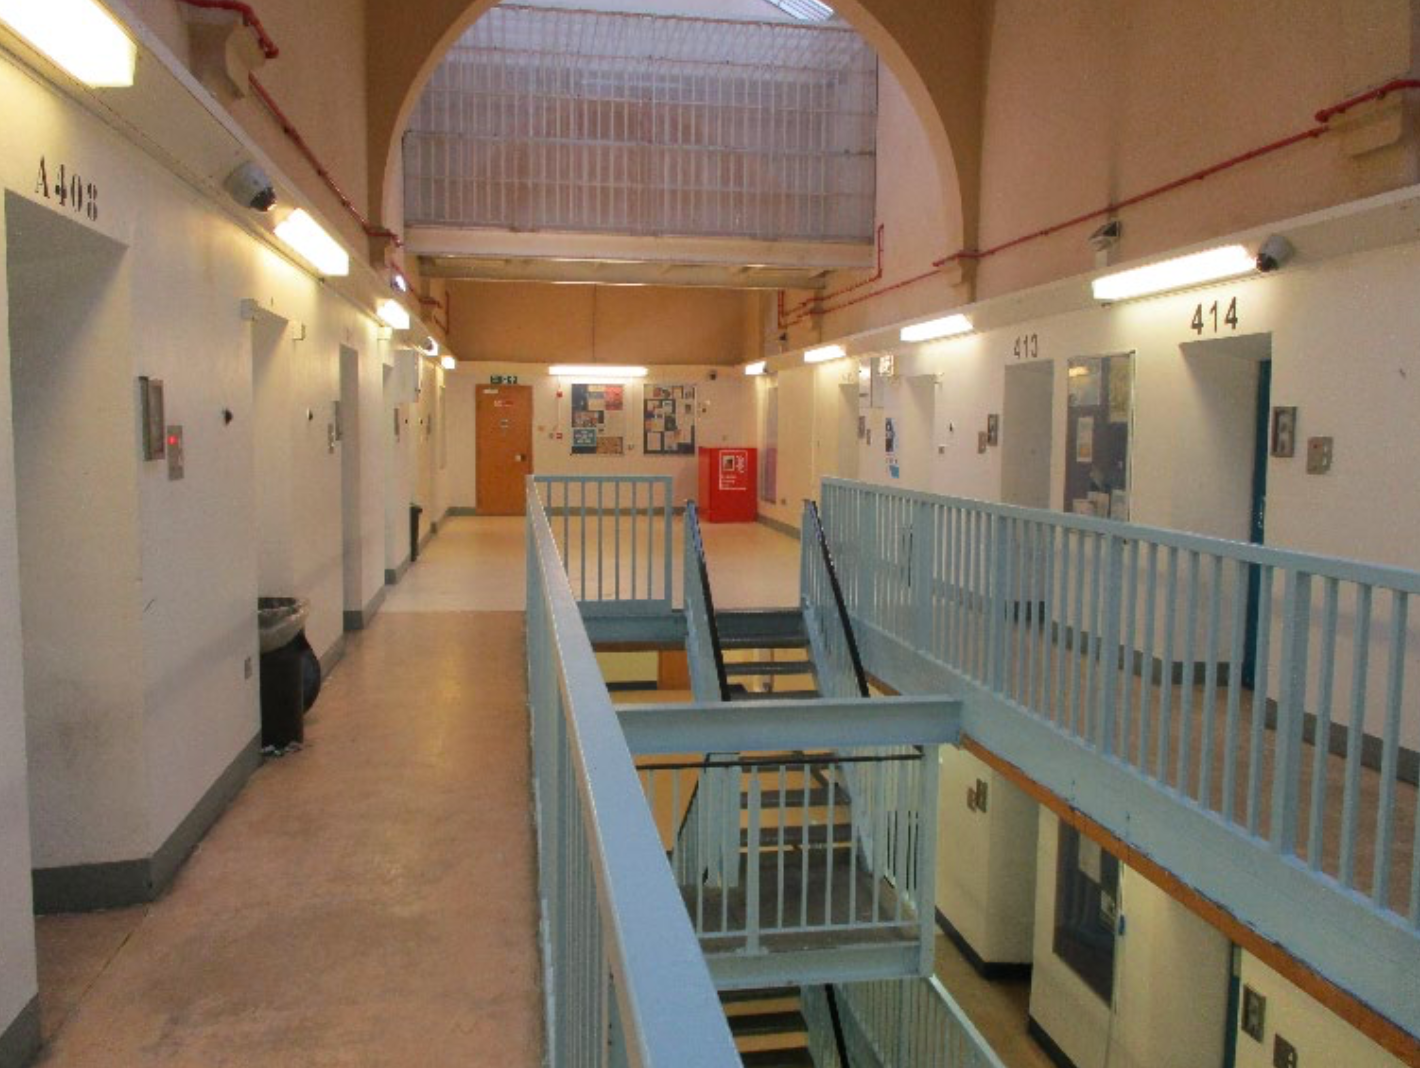 Sir Keir Starmer described his shock at the state of the nation’s prisons